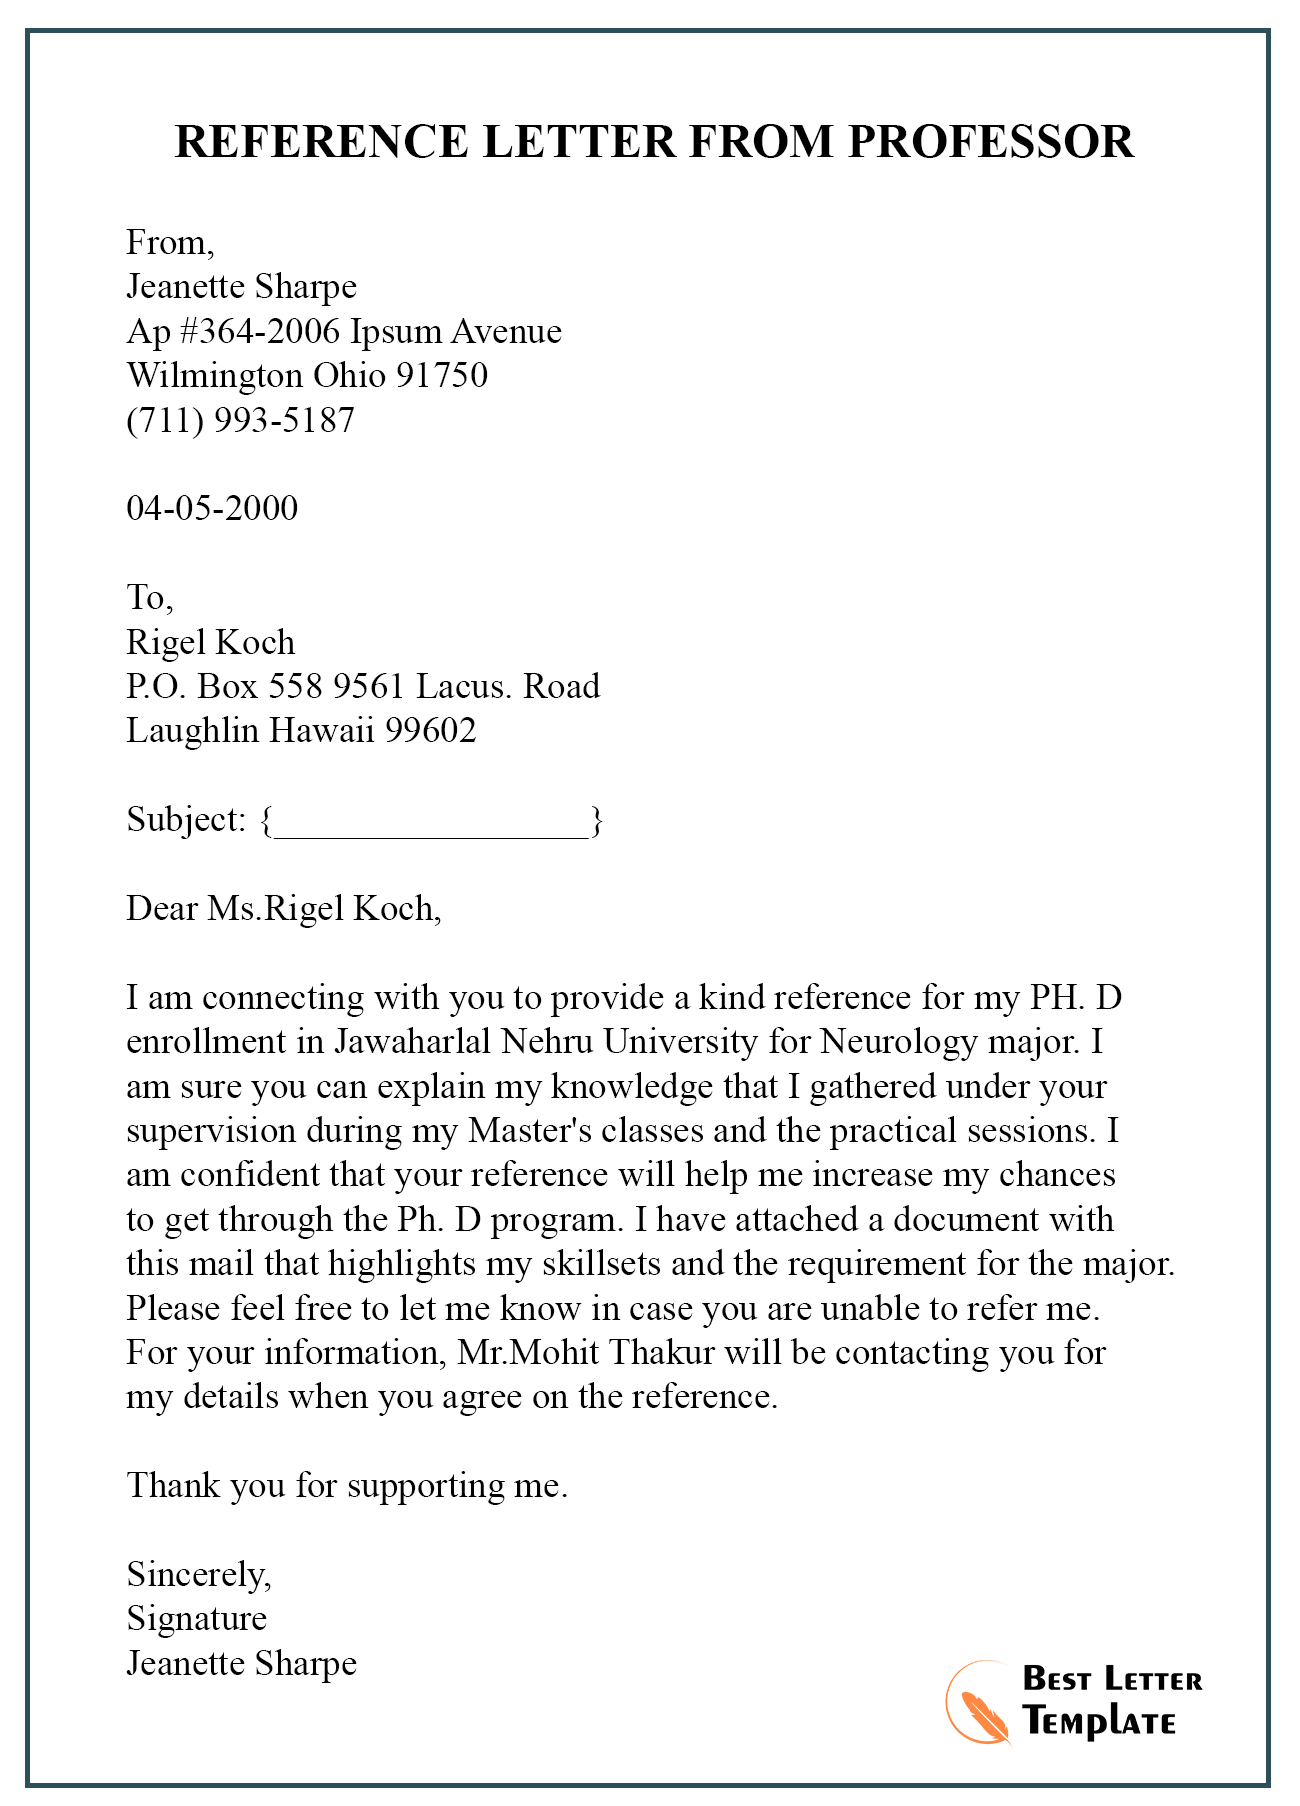 Request For Reference Letter From Professor Sample Best within sizing 1300 X 1806